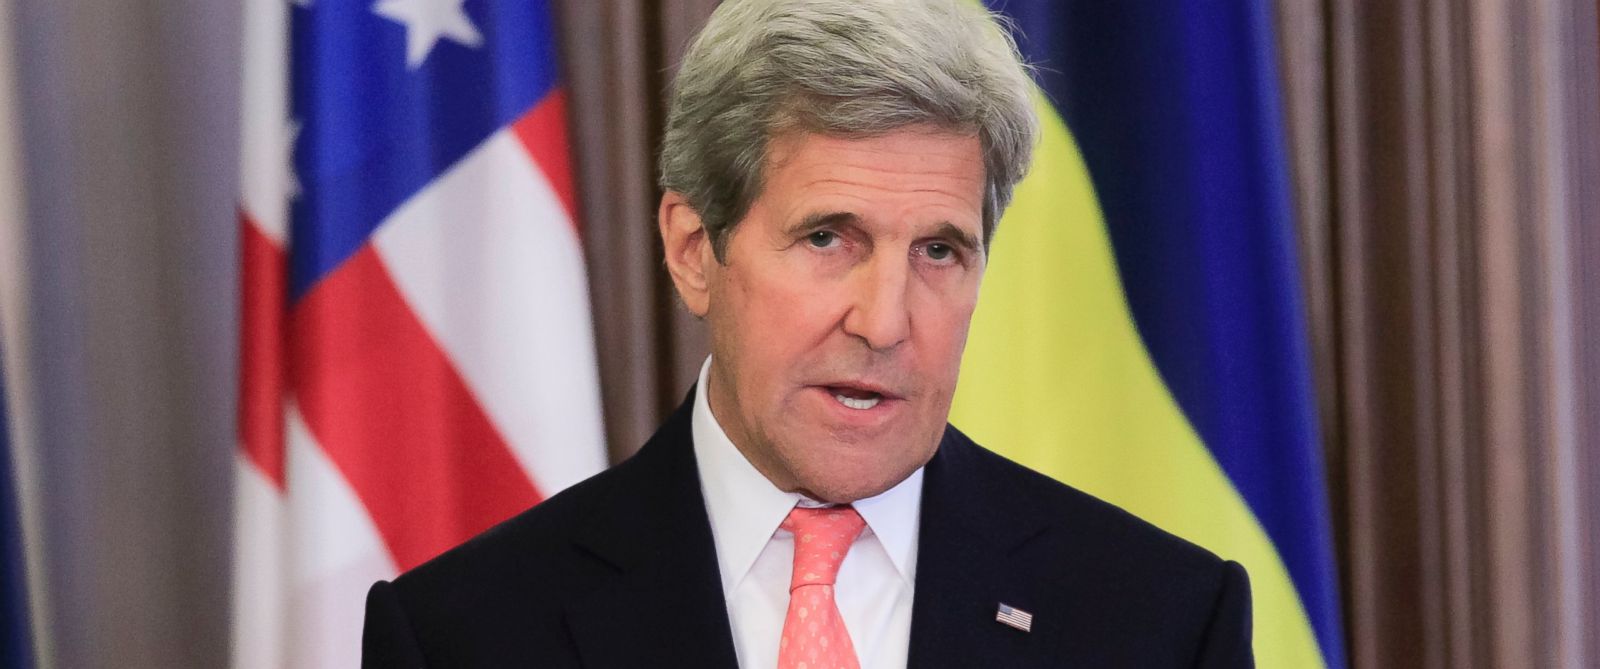 John Kerry Says US Concerned that Turkey Could Crack Down on Democracy After Coup Attempt